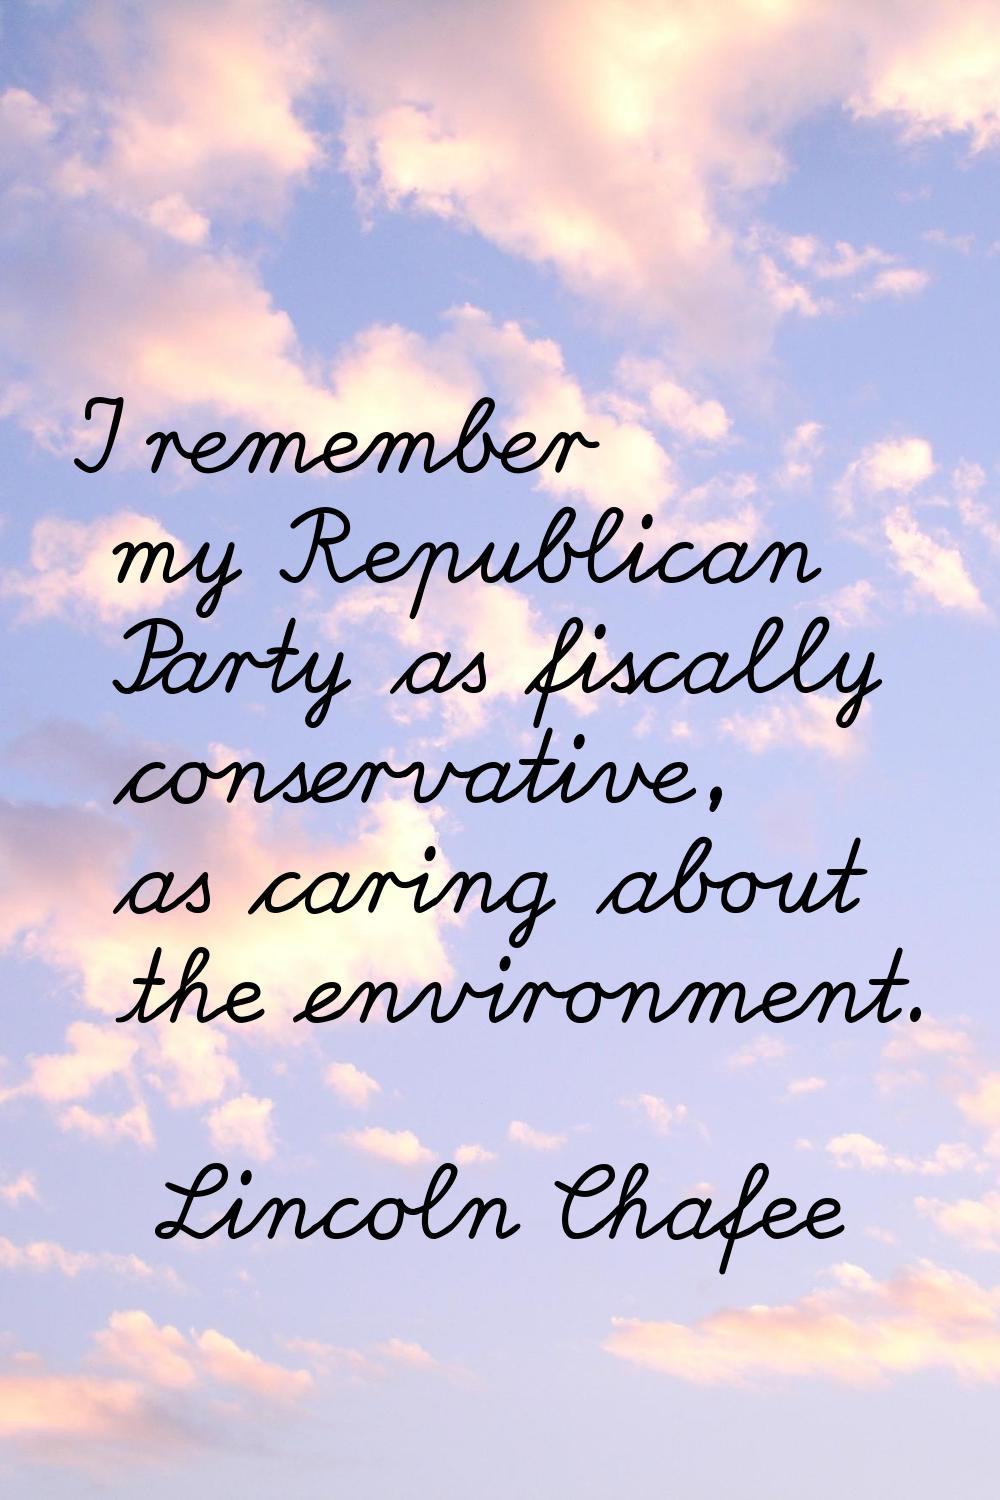 I remember my Republican Party as fiscally conservative, as caring about the environment.